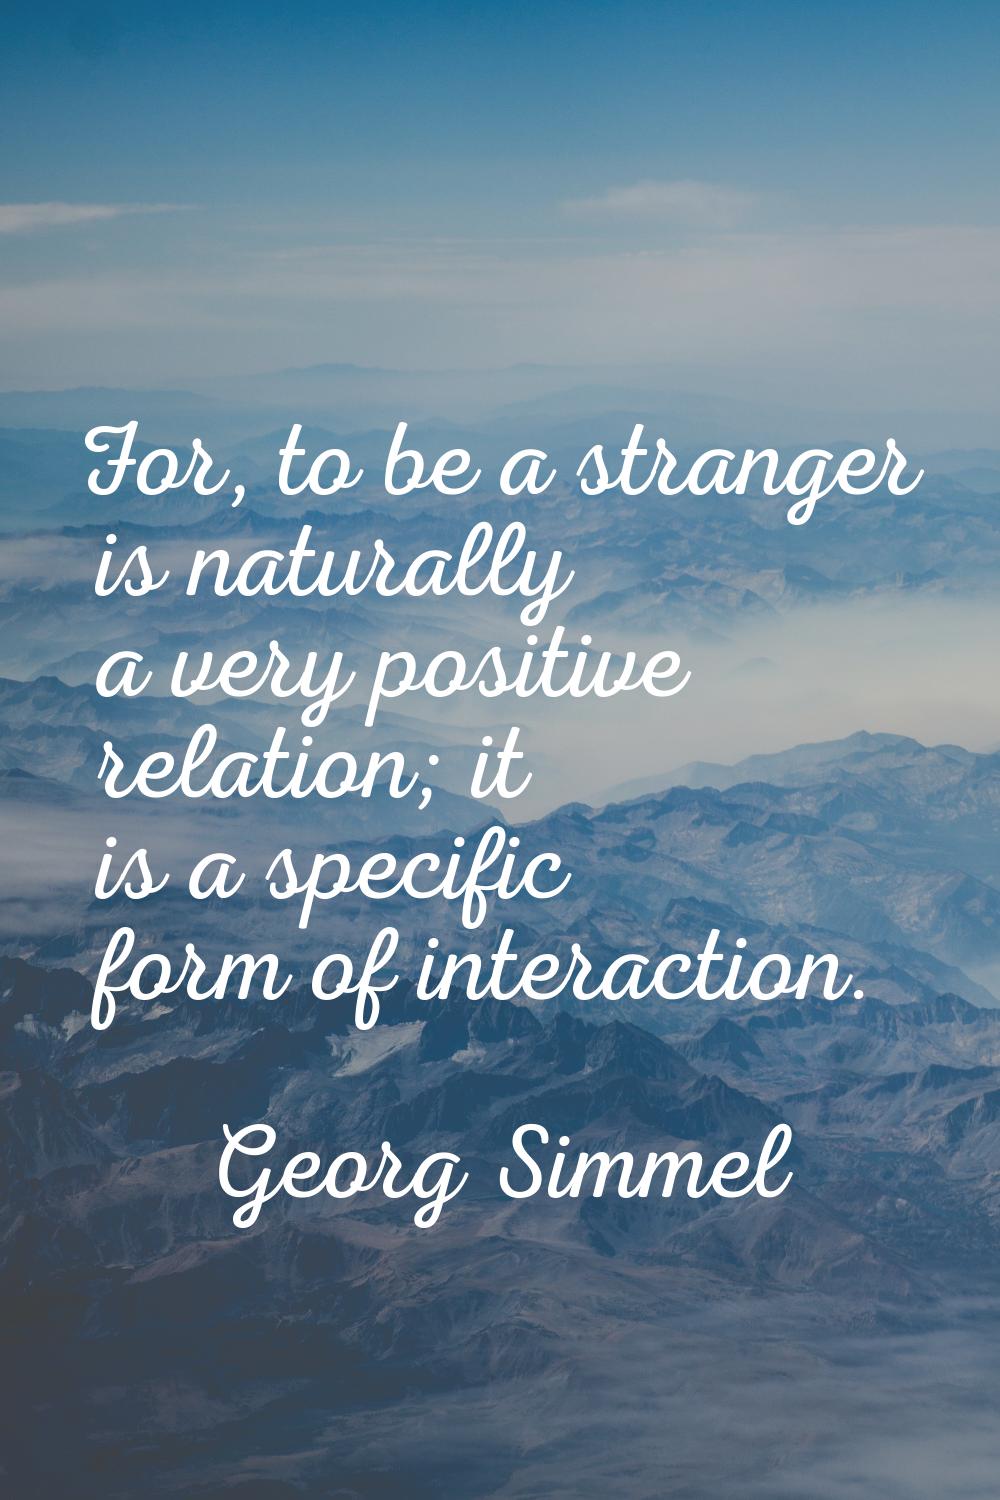 For, to be a stranger is naturally a very positive relation; it is a specific form of interaction.